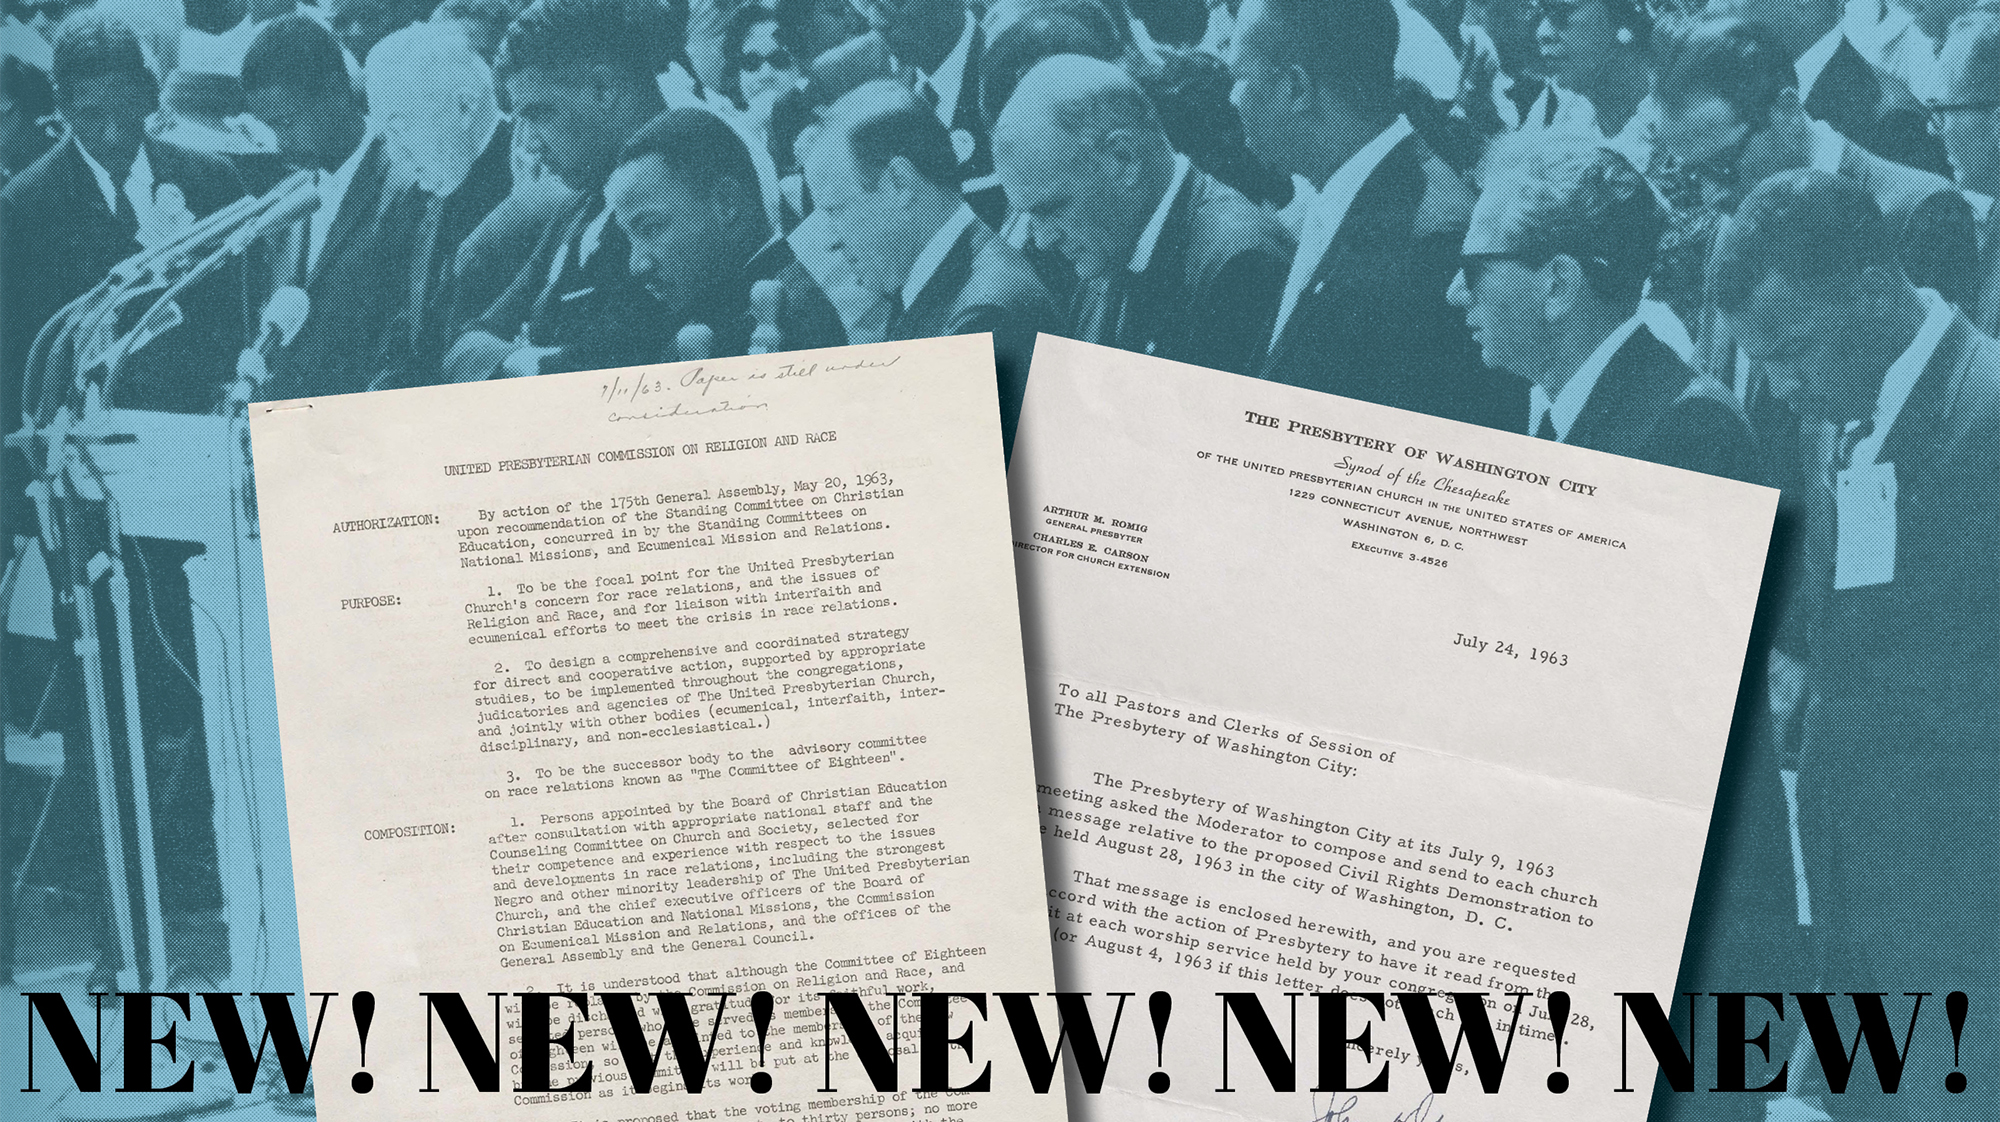 Records and photo related to 1963 March on Washington for Jobs and Freedom, montage by McKenna Britton.